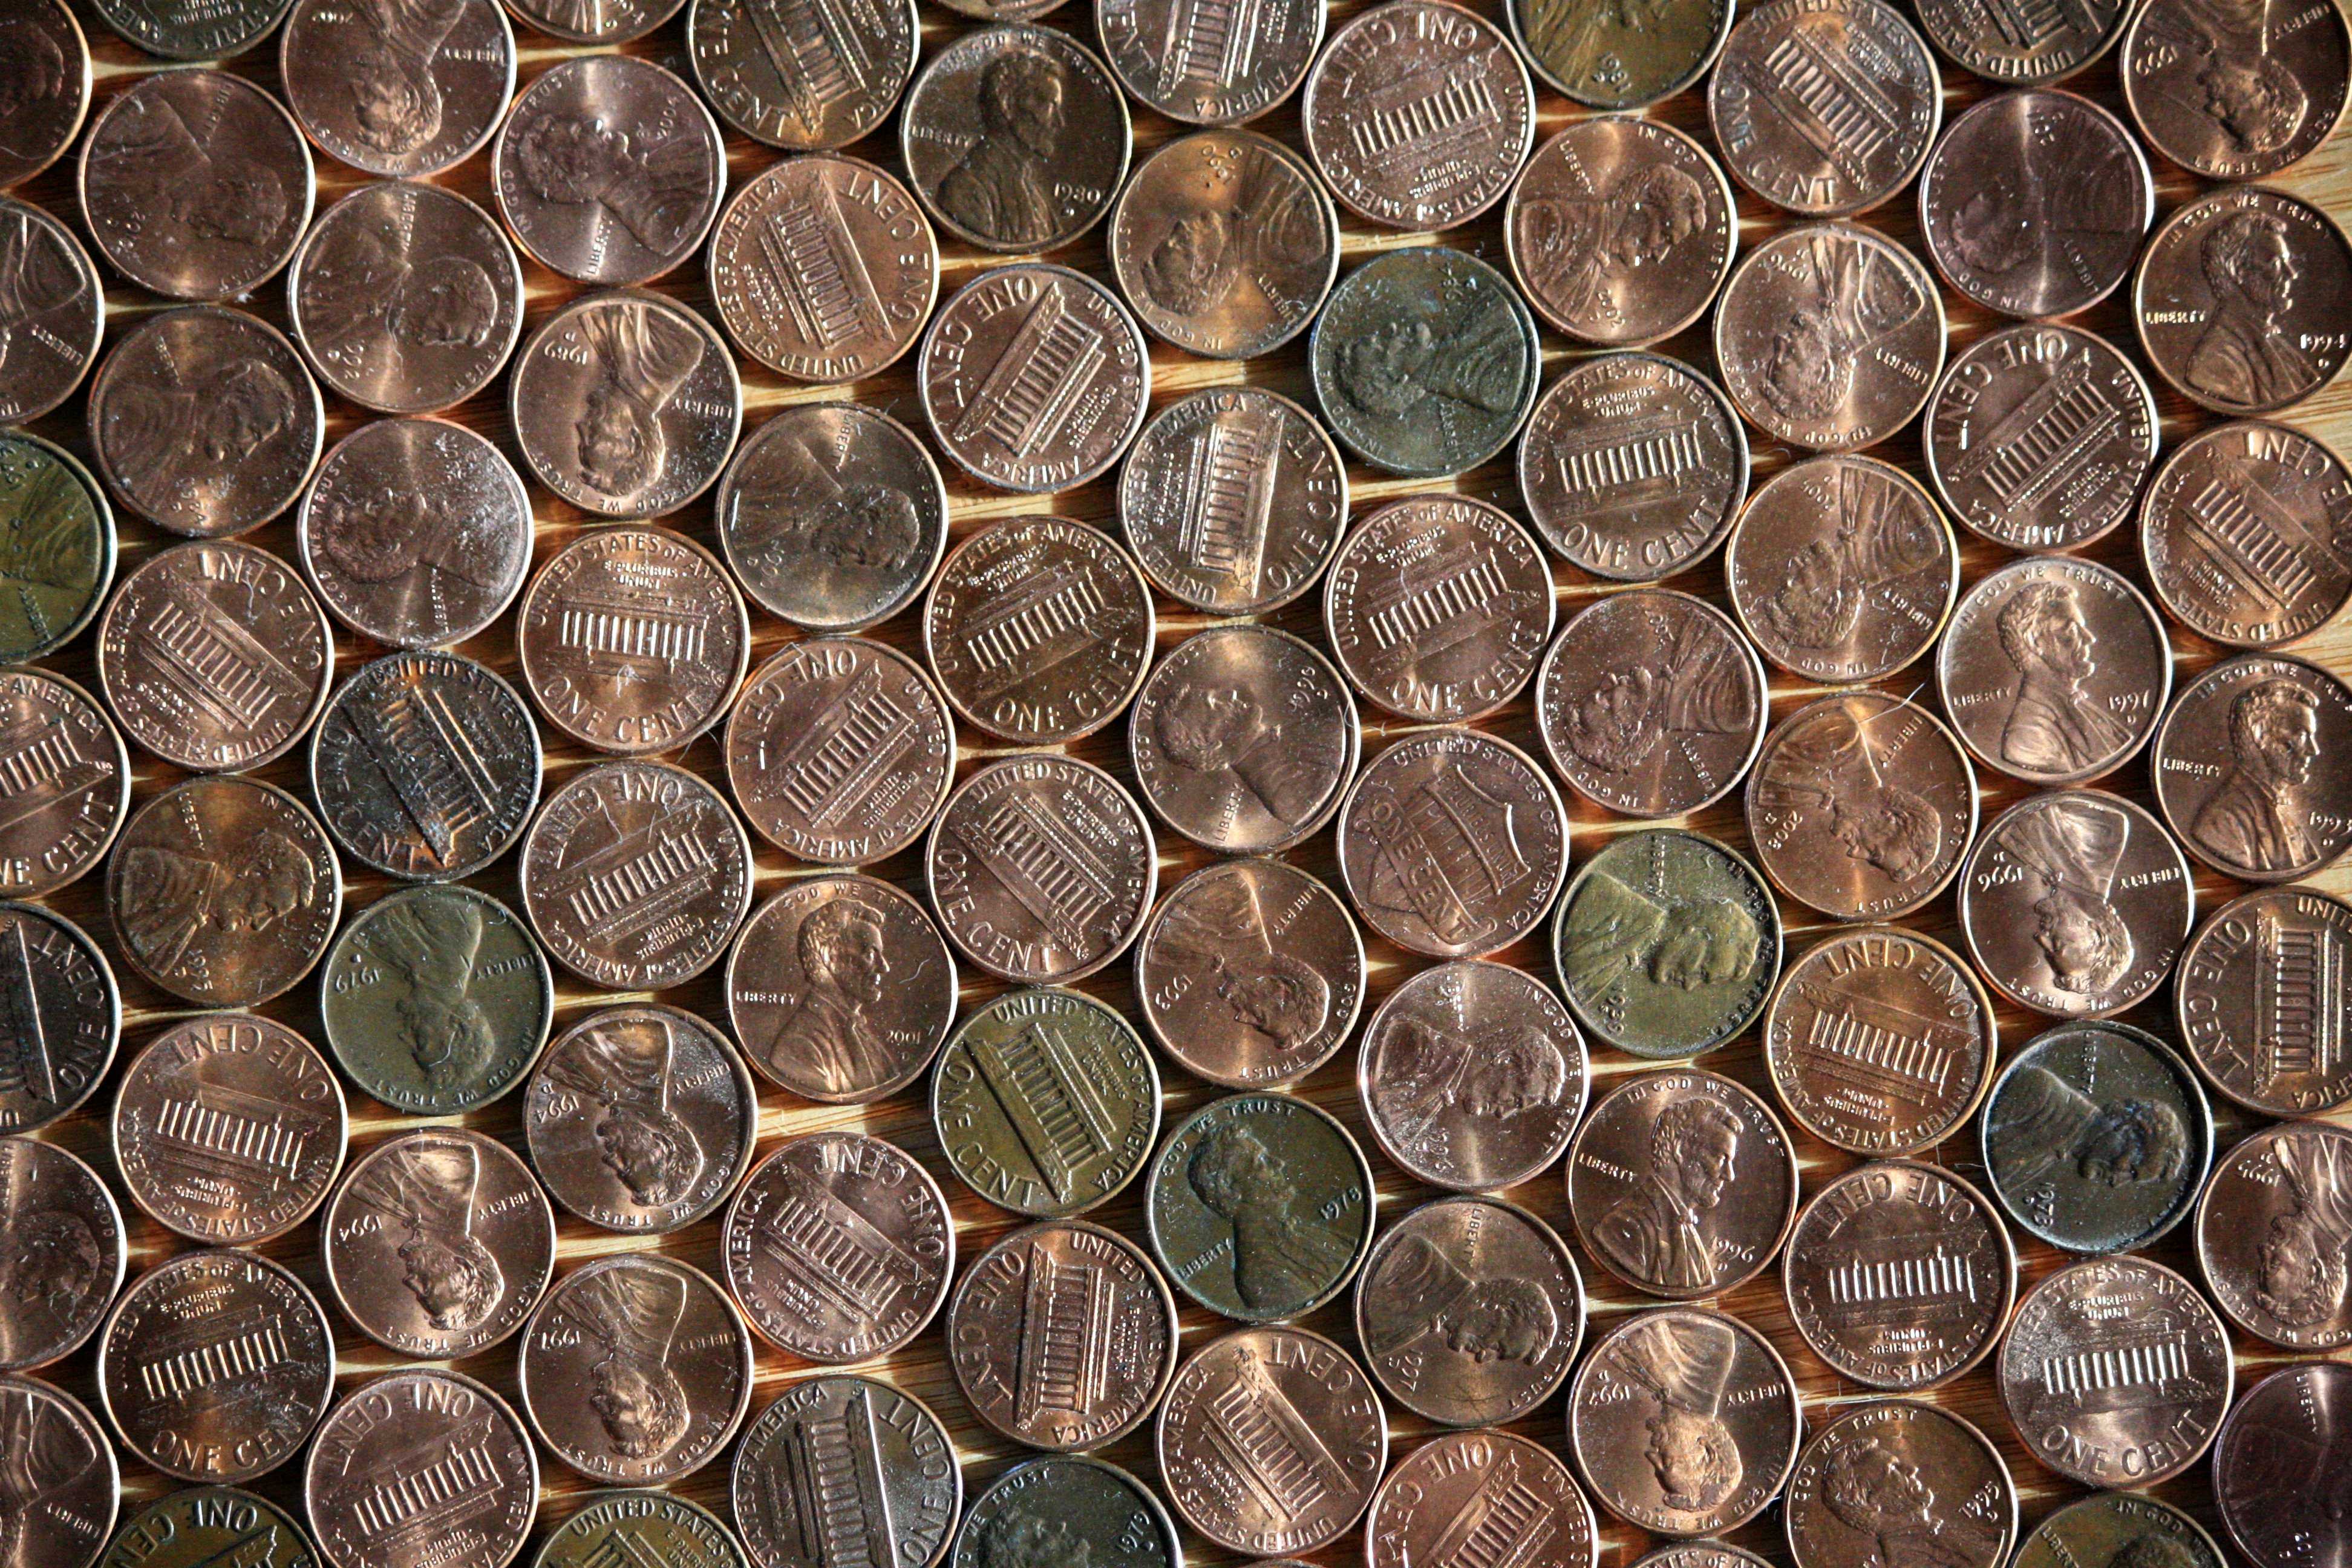 coins, texture, download photo, coins texture, background, coins